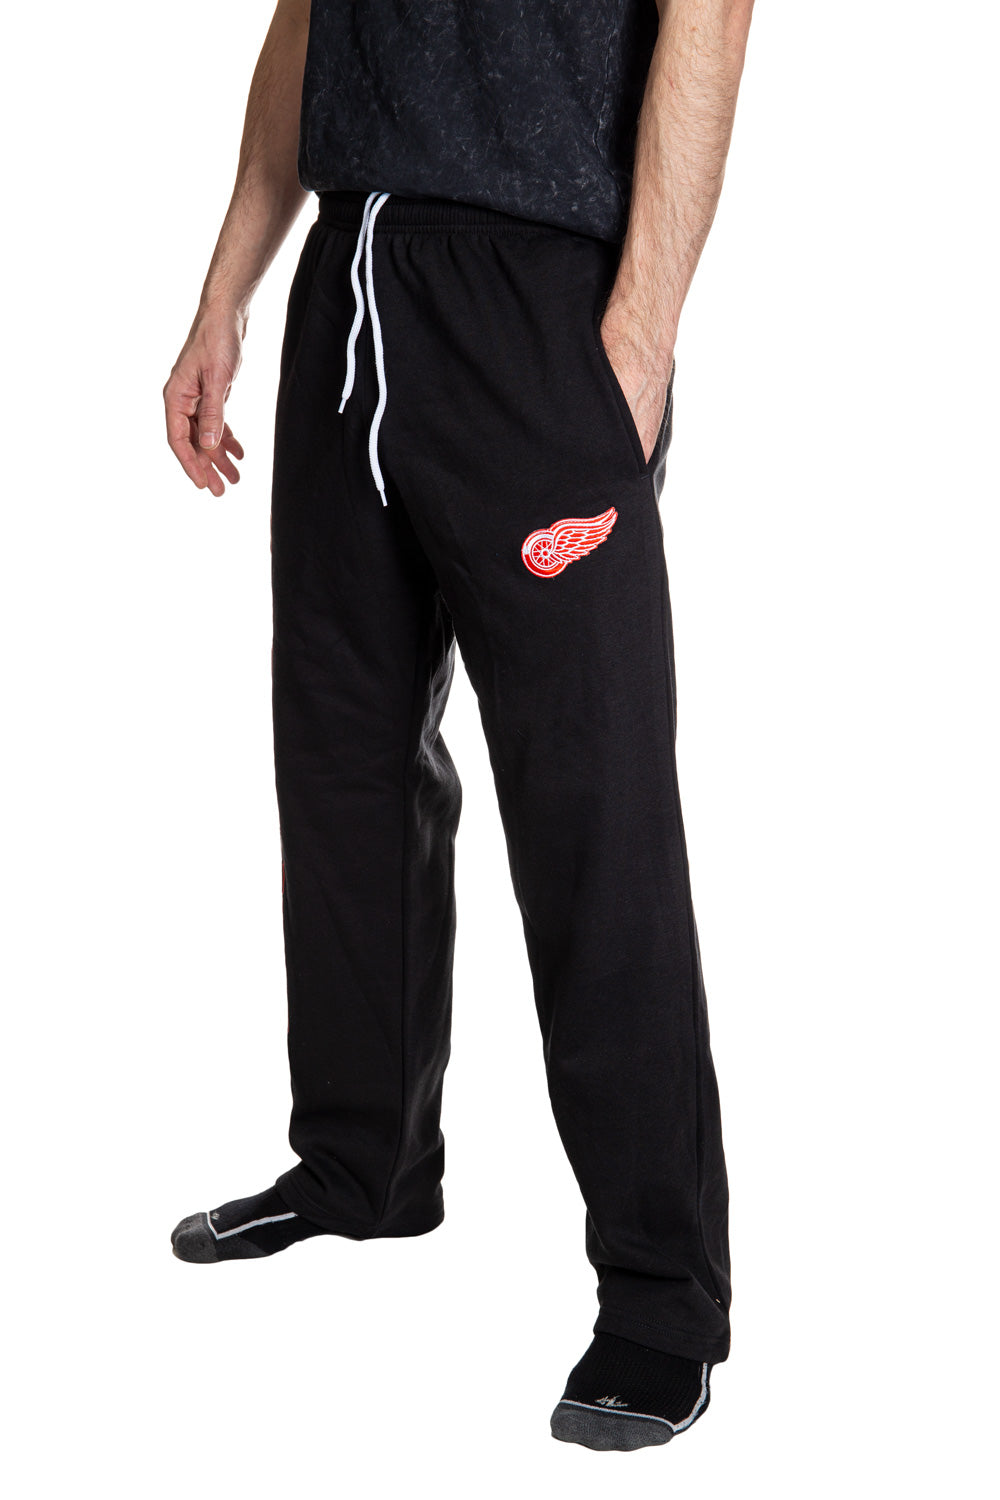 Detroit Red Wings Premium Fleece Sweatpants Side View of Embroidered Logo.